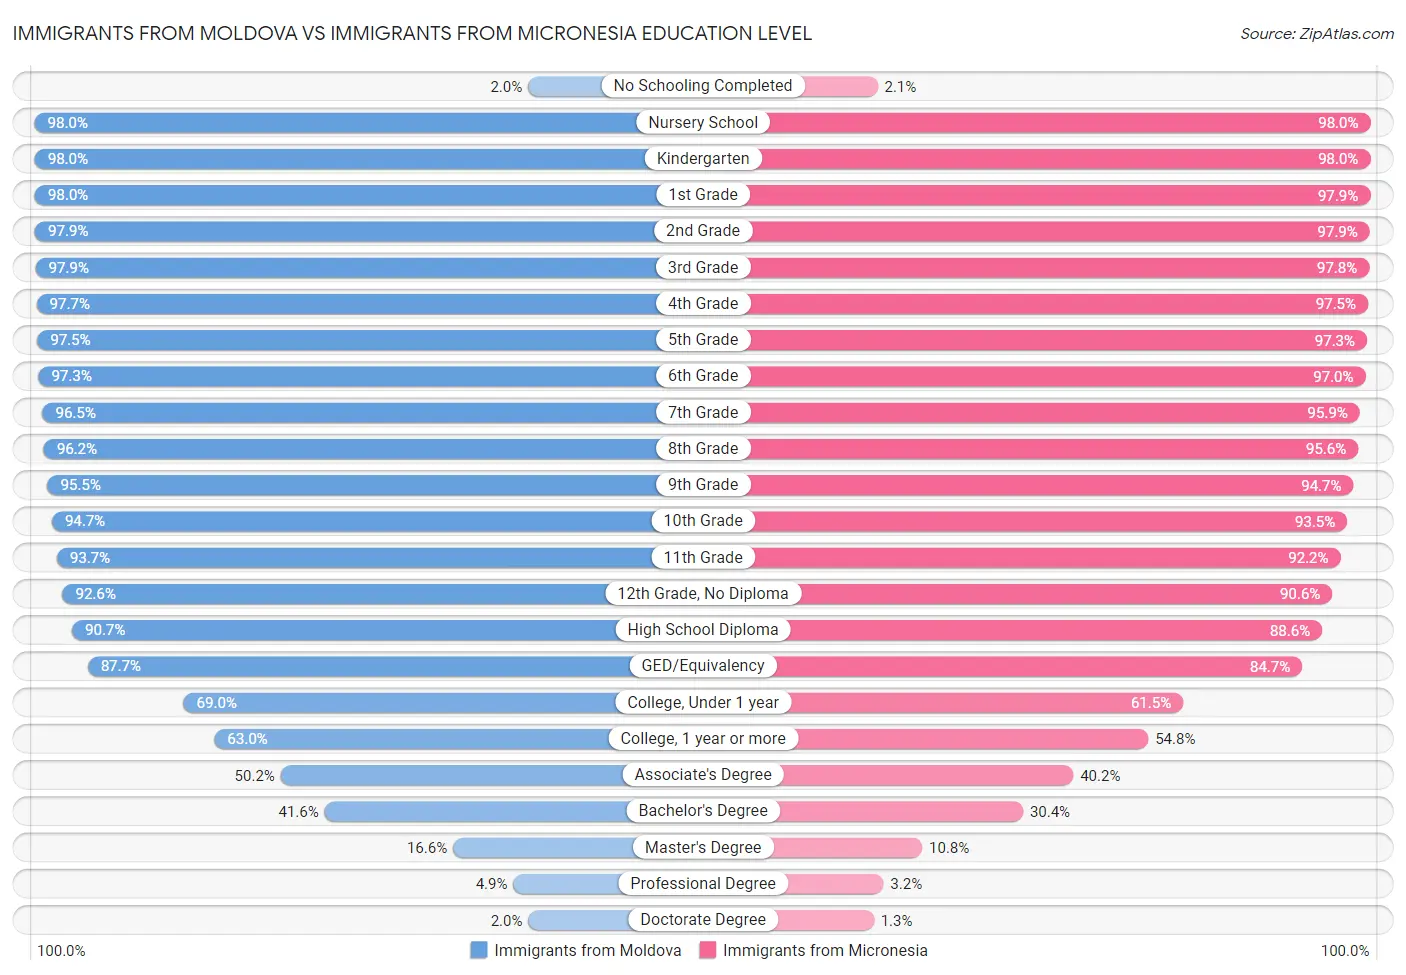 Immigrants from Moldova vs Immigrants from Micronesia Education Level